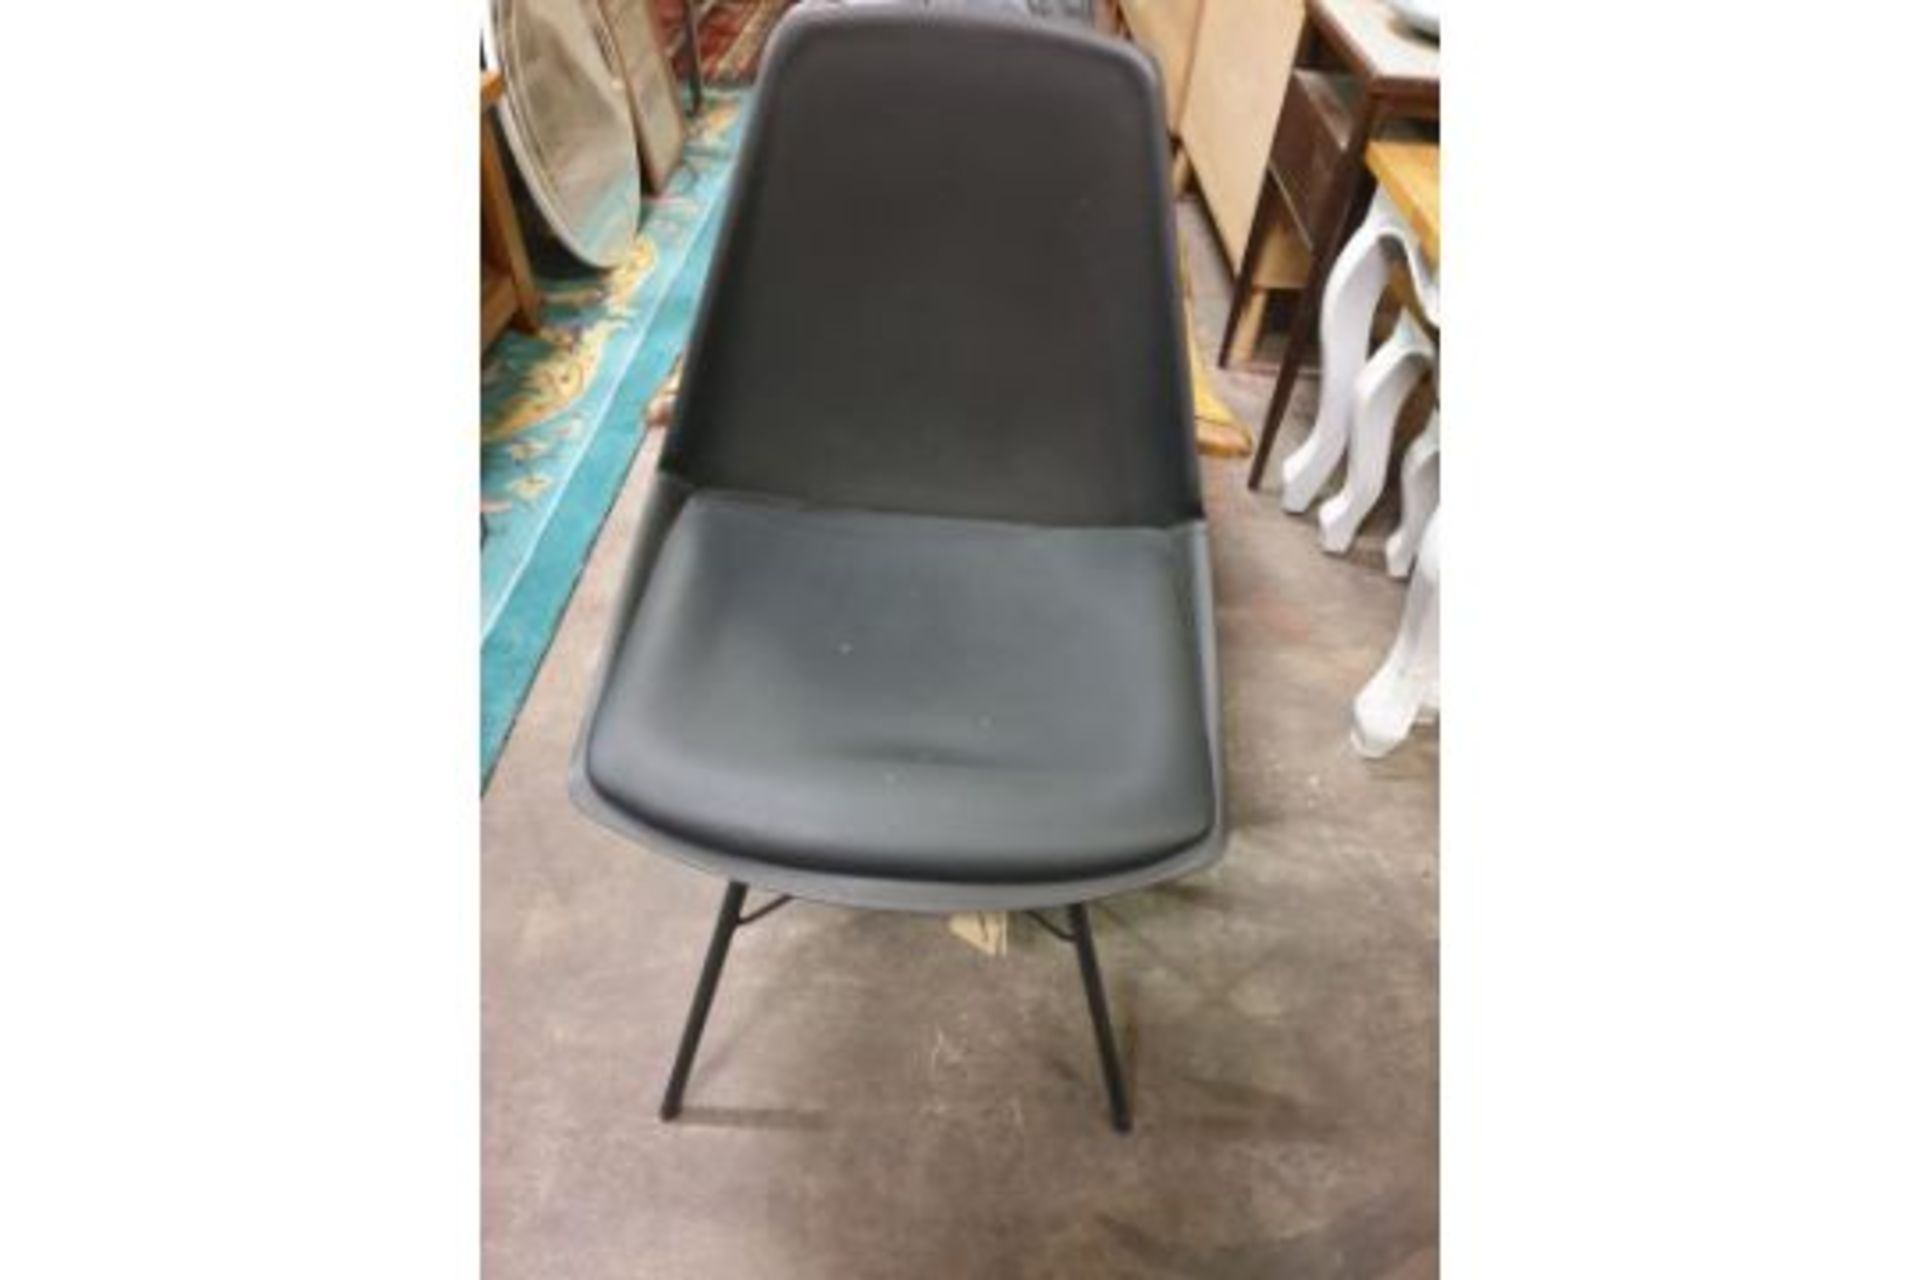 Finchley Dining Chair Black The Finchley Chair Is A Modern Style Dining Chair With A Leather Cushion - Image 2 of 2